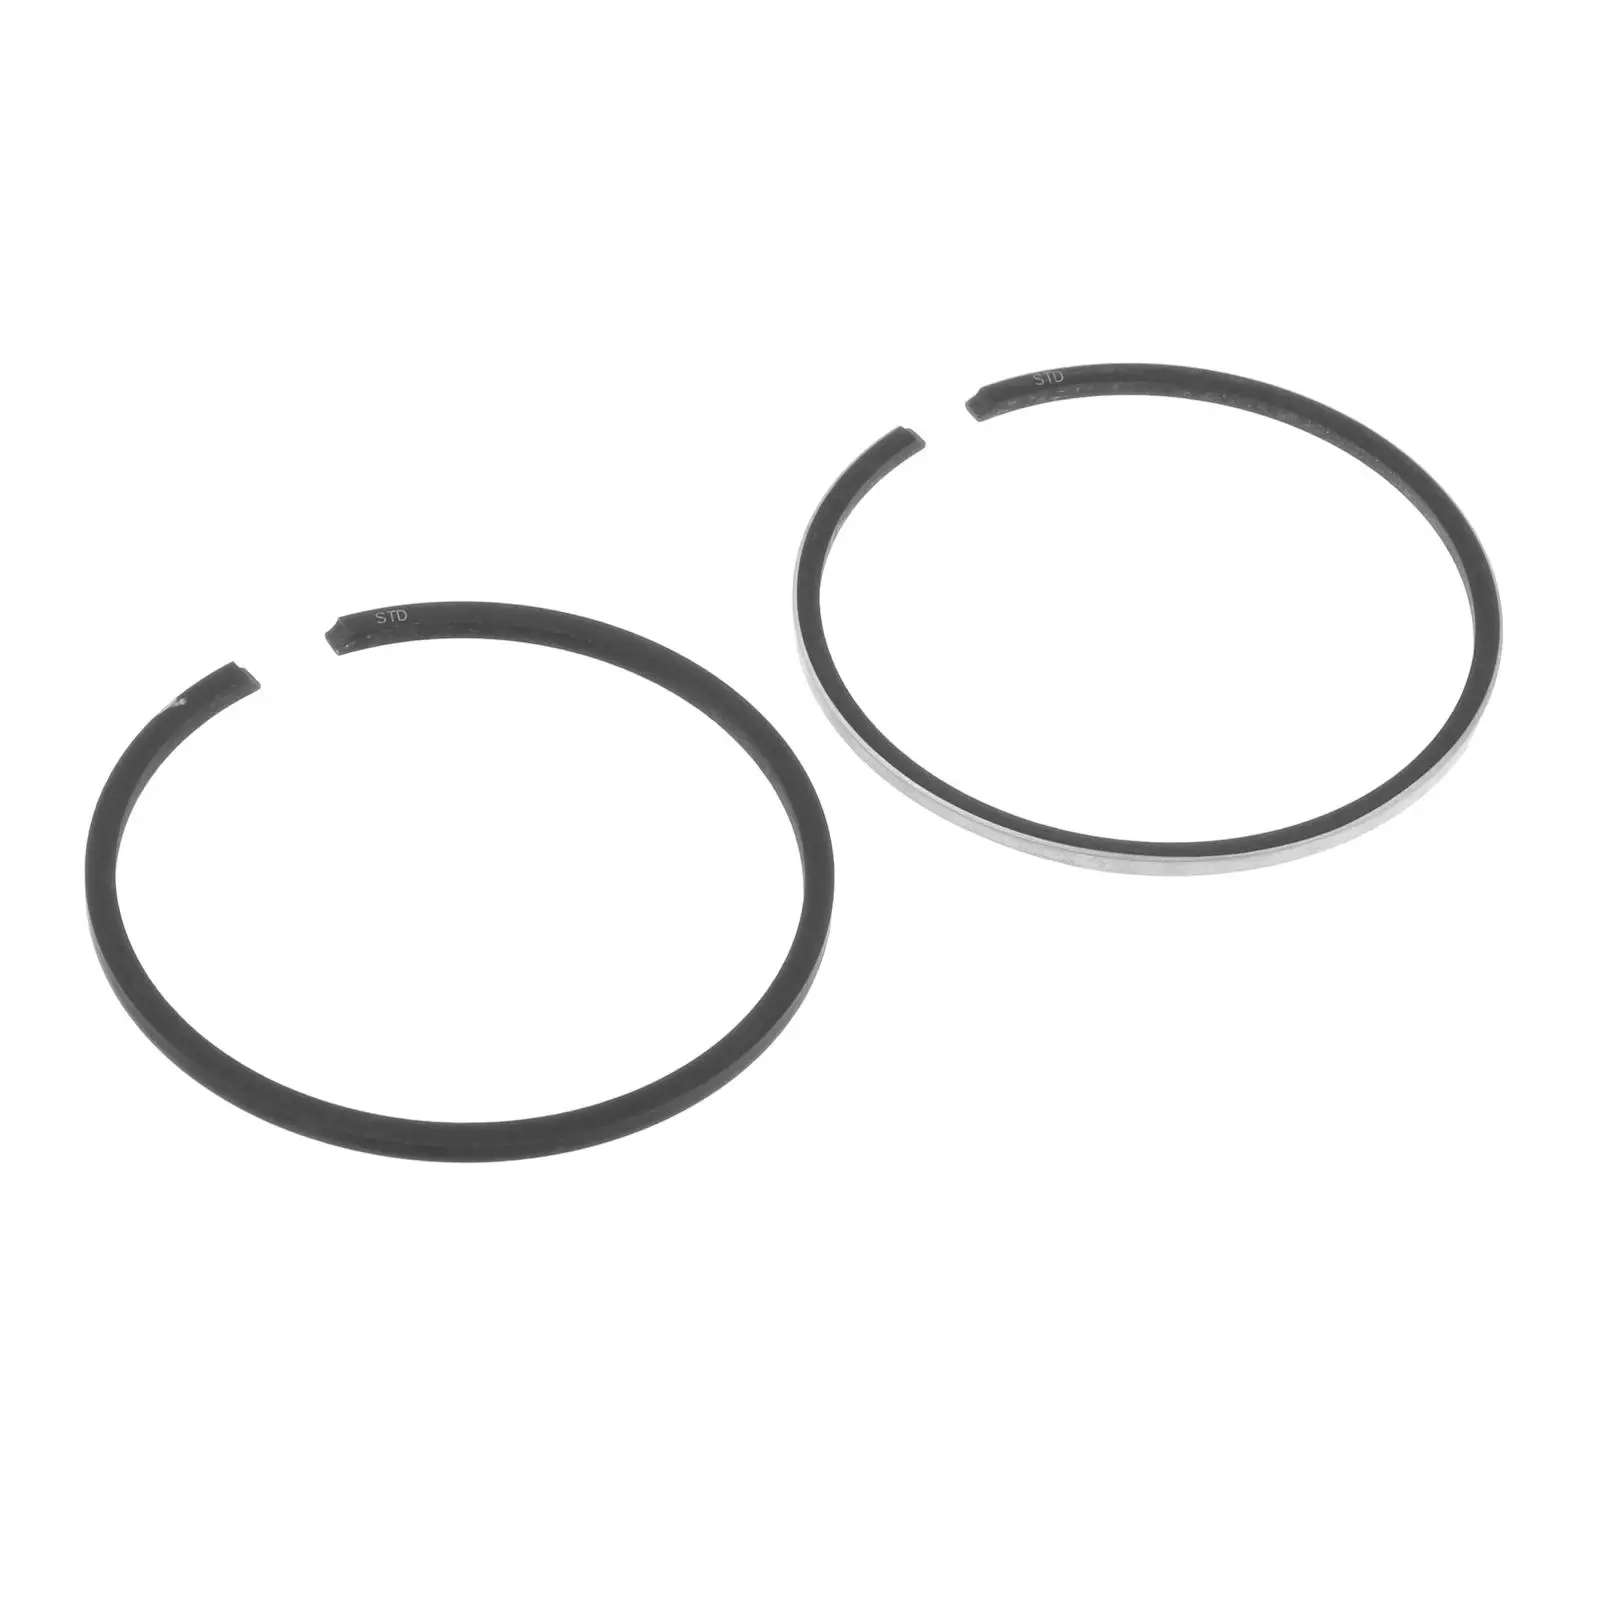 Engine Piston Rings Set Replace 682-11610-01-00 for Hidea 9.9HP Outboards